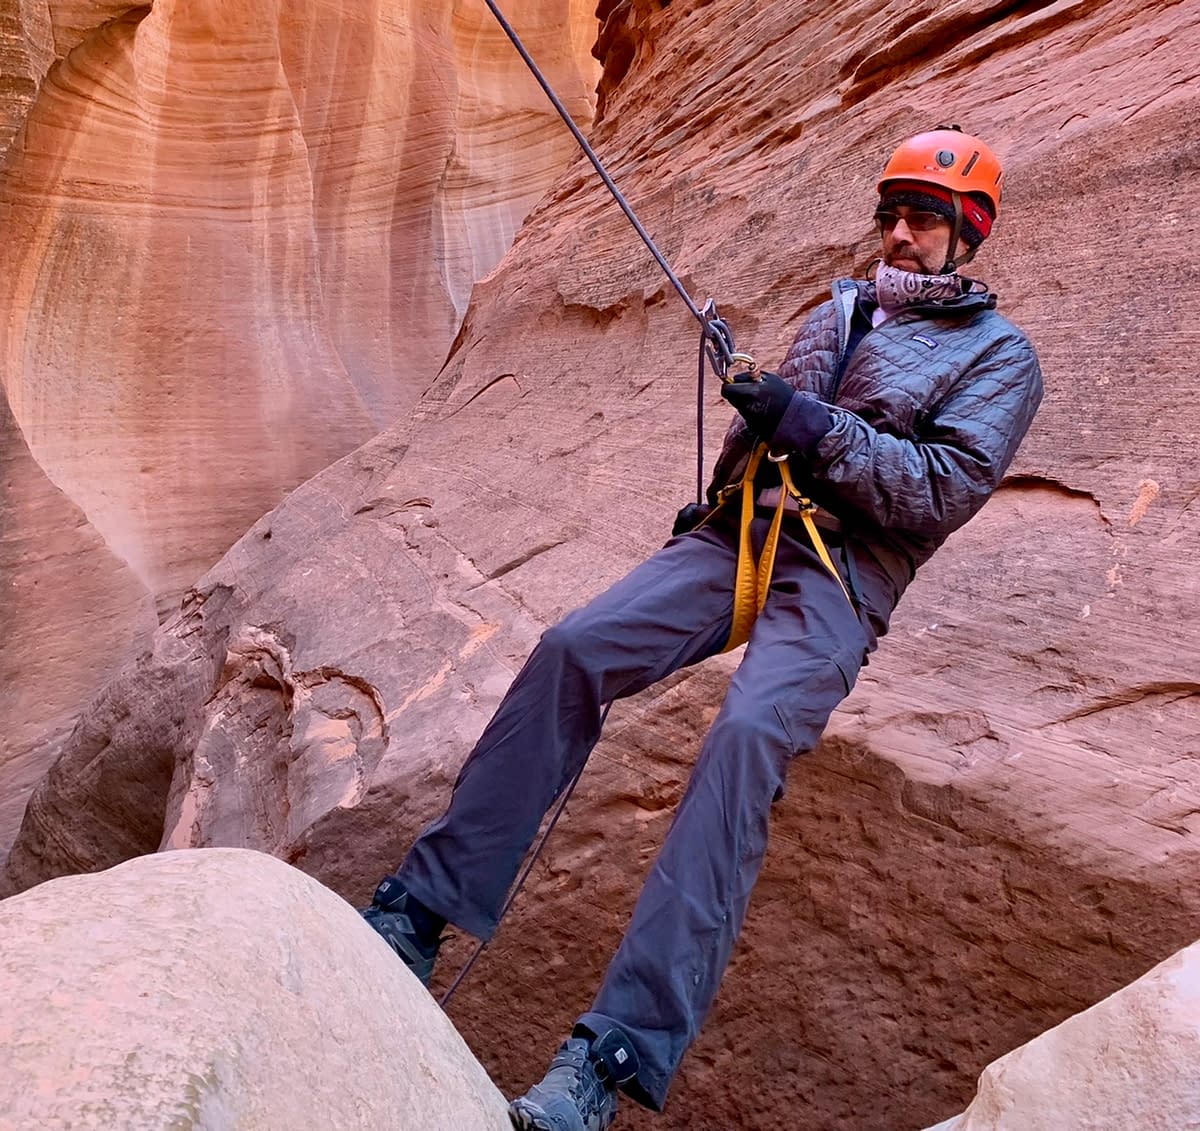 Canyoneering Ladder Slot Canyon in Orderville Utah was one of my favorite Food and Travel Experiences of 2021